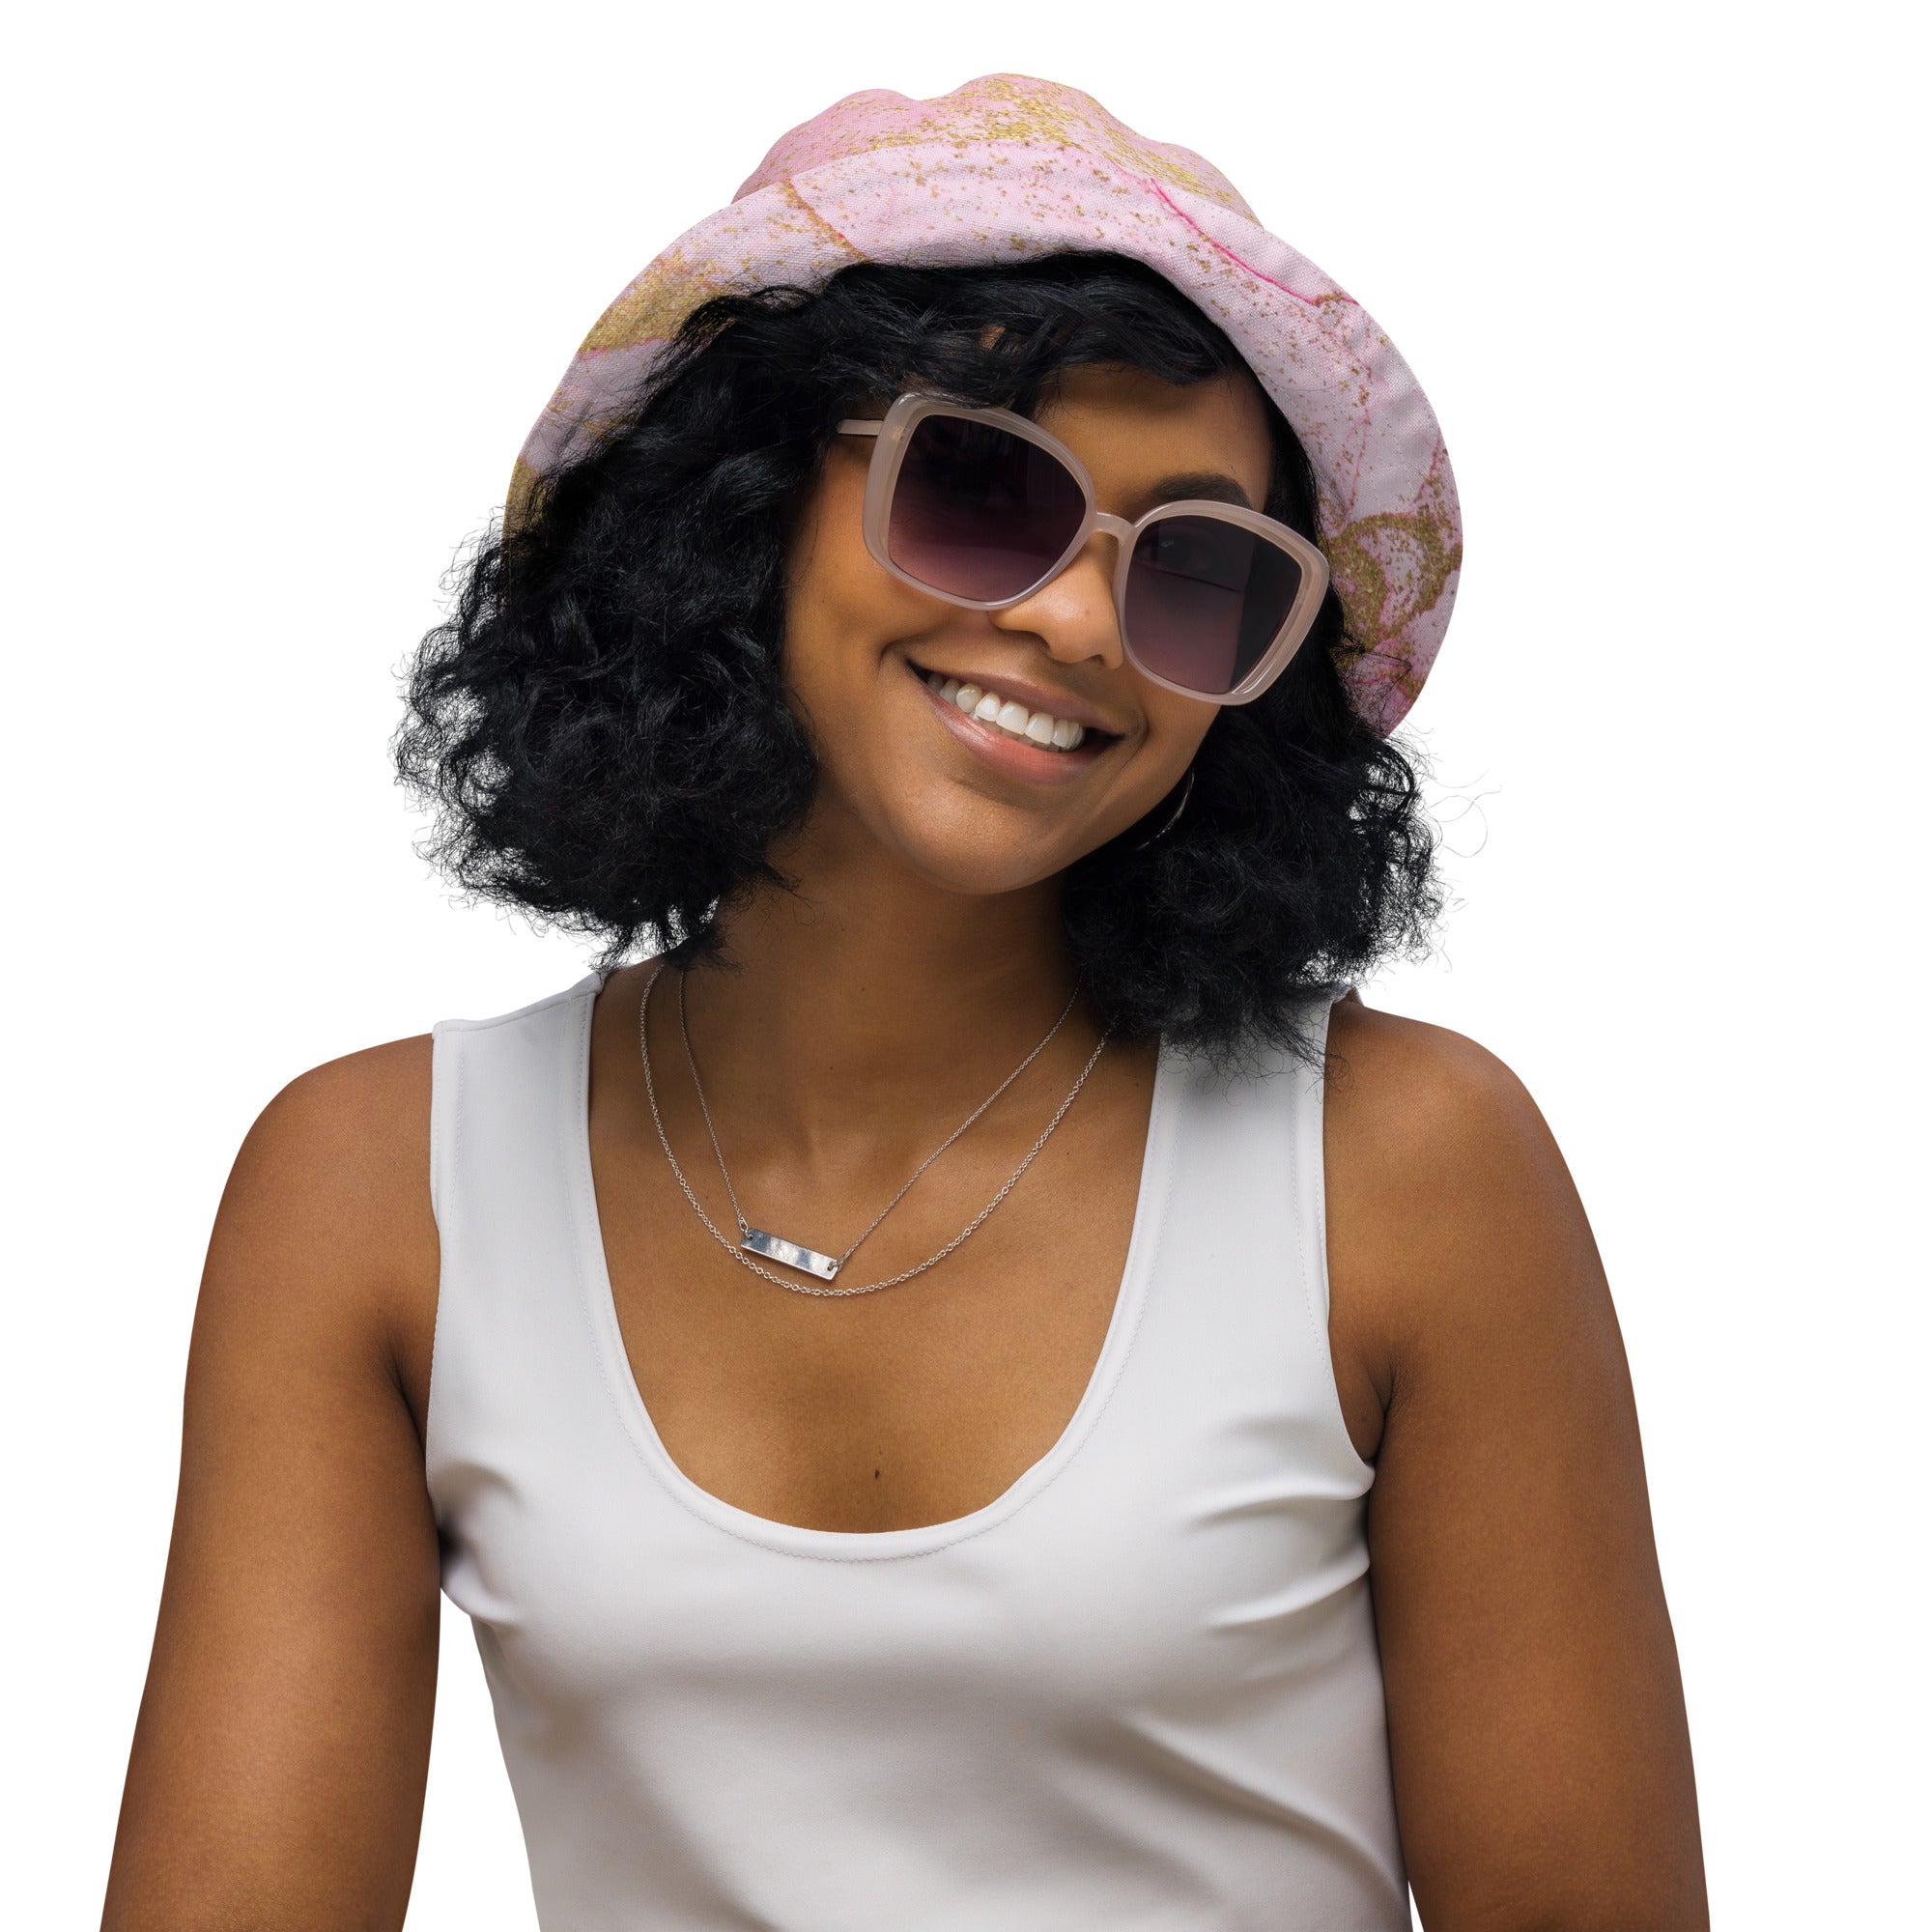 "Rose Quartz Radiance: Elevate Your Style with Our Pink and Gold Marble Bucket Hat", lioness-love